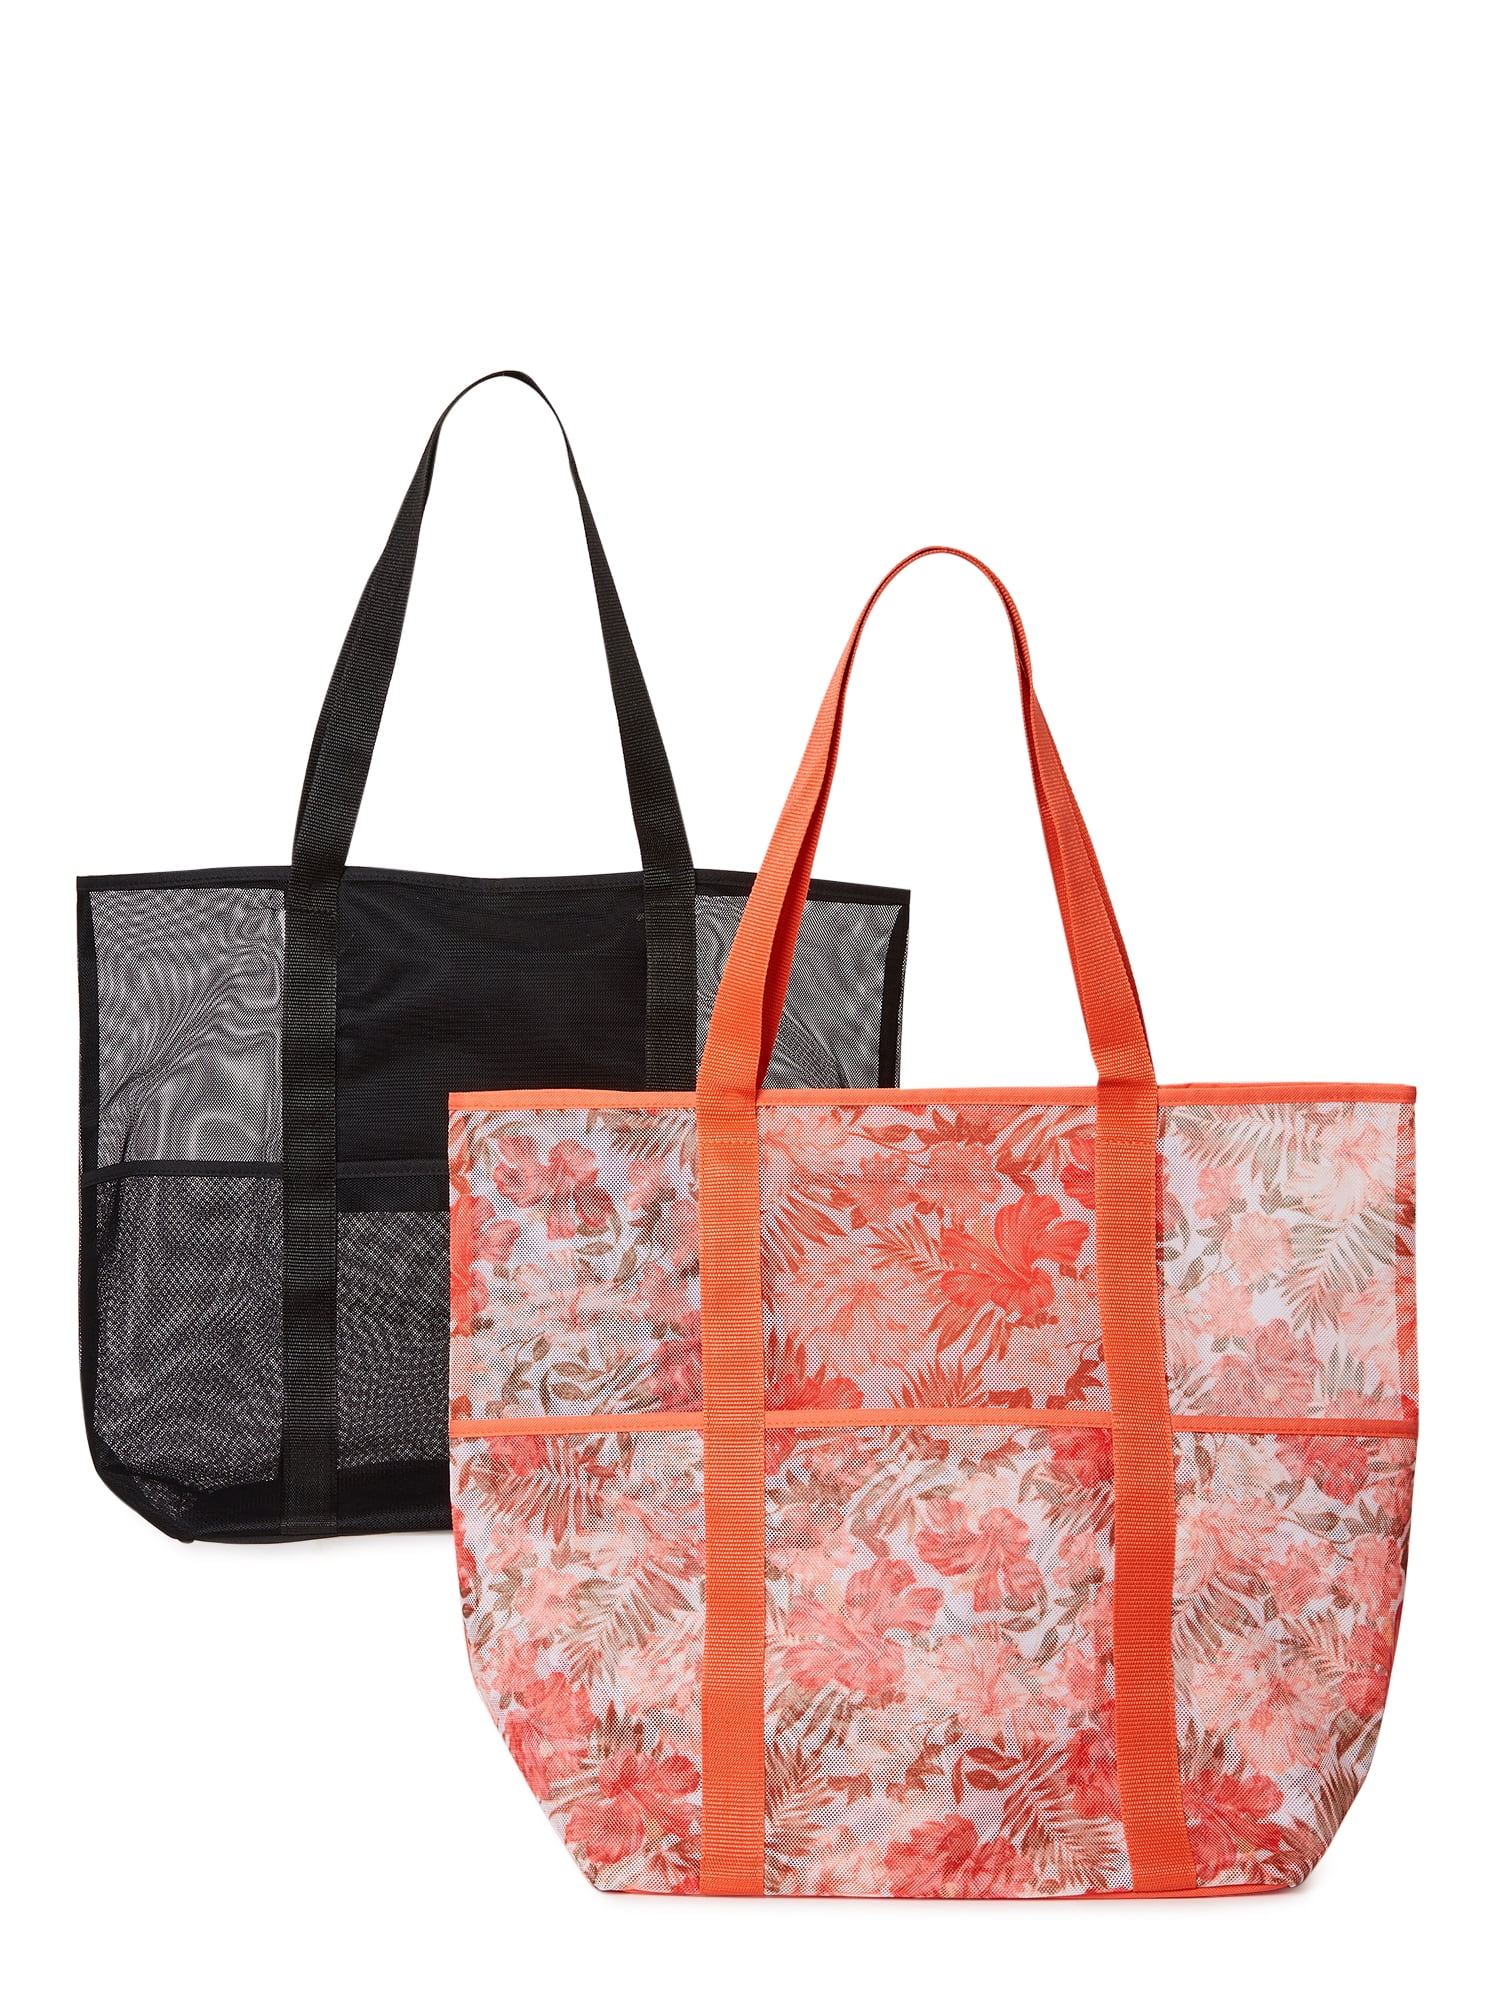 Mango Women's Floral Tote Bag | Vancouver Mall